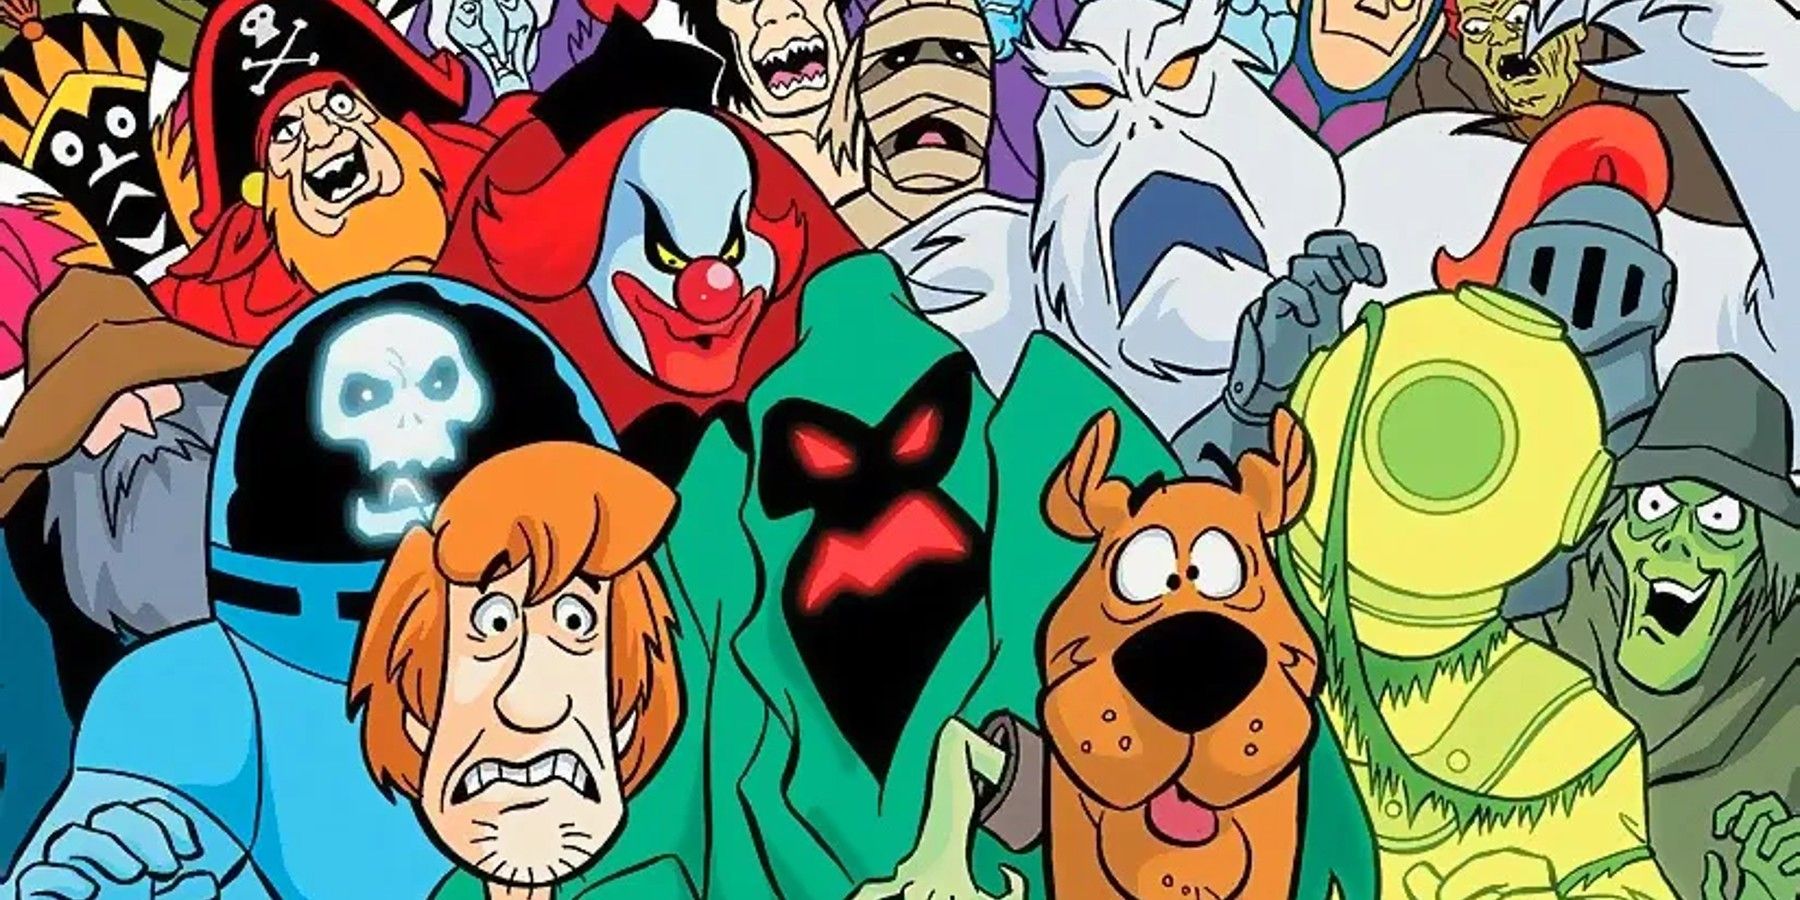 Classic Scooby-Doo Villains That Would Be Great for MultiVersus